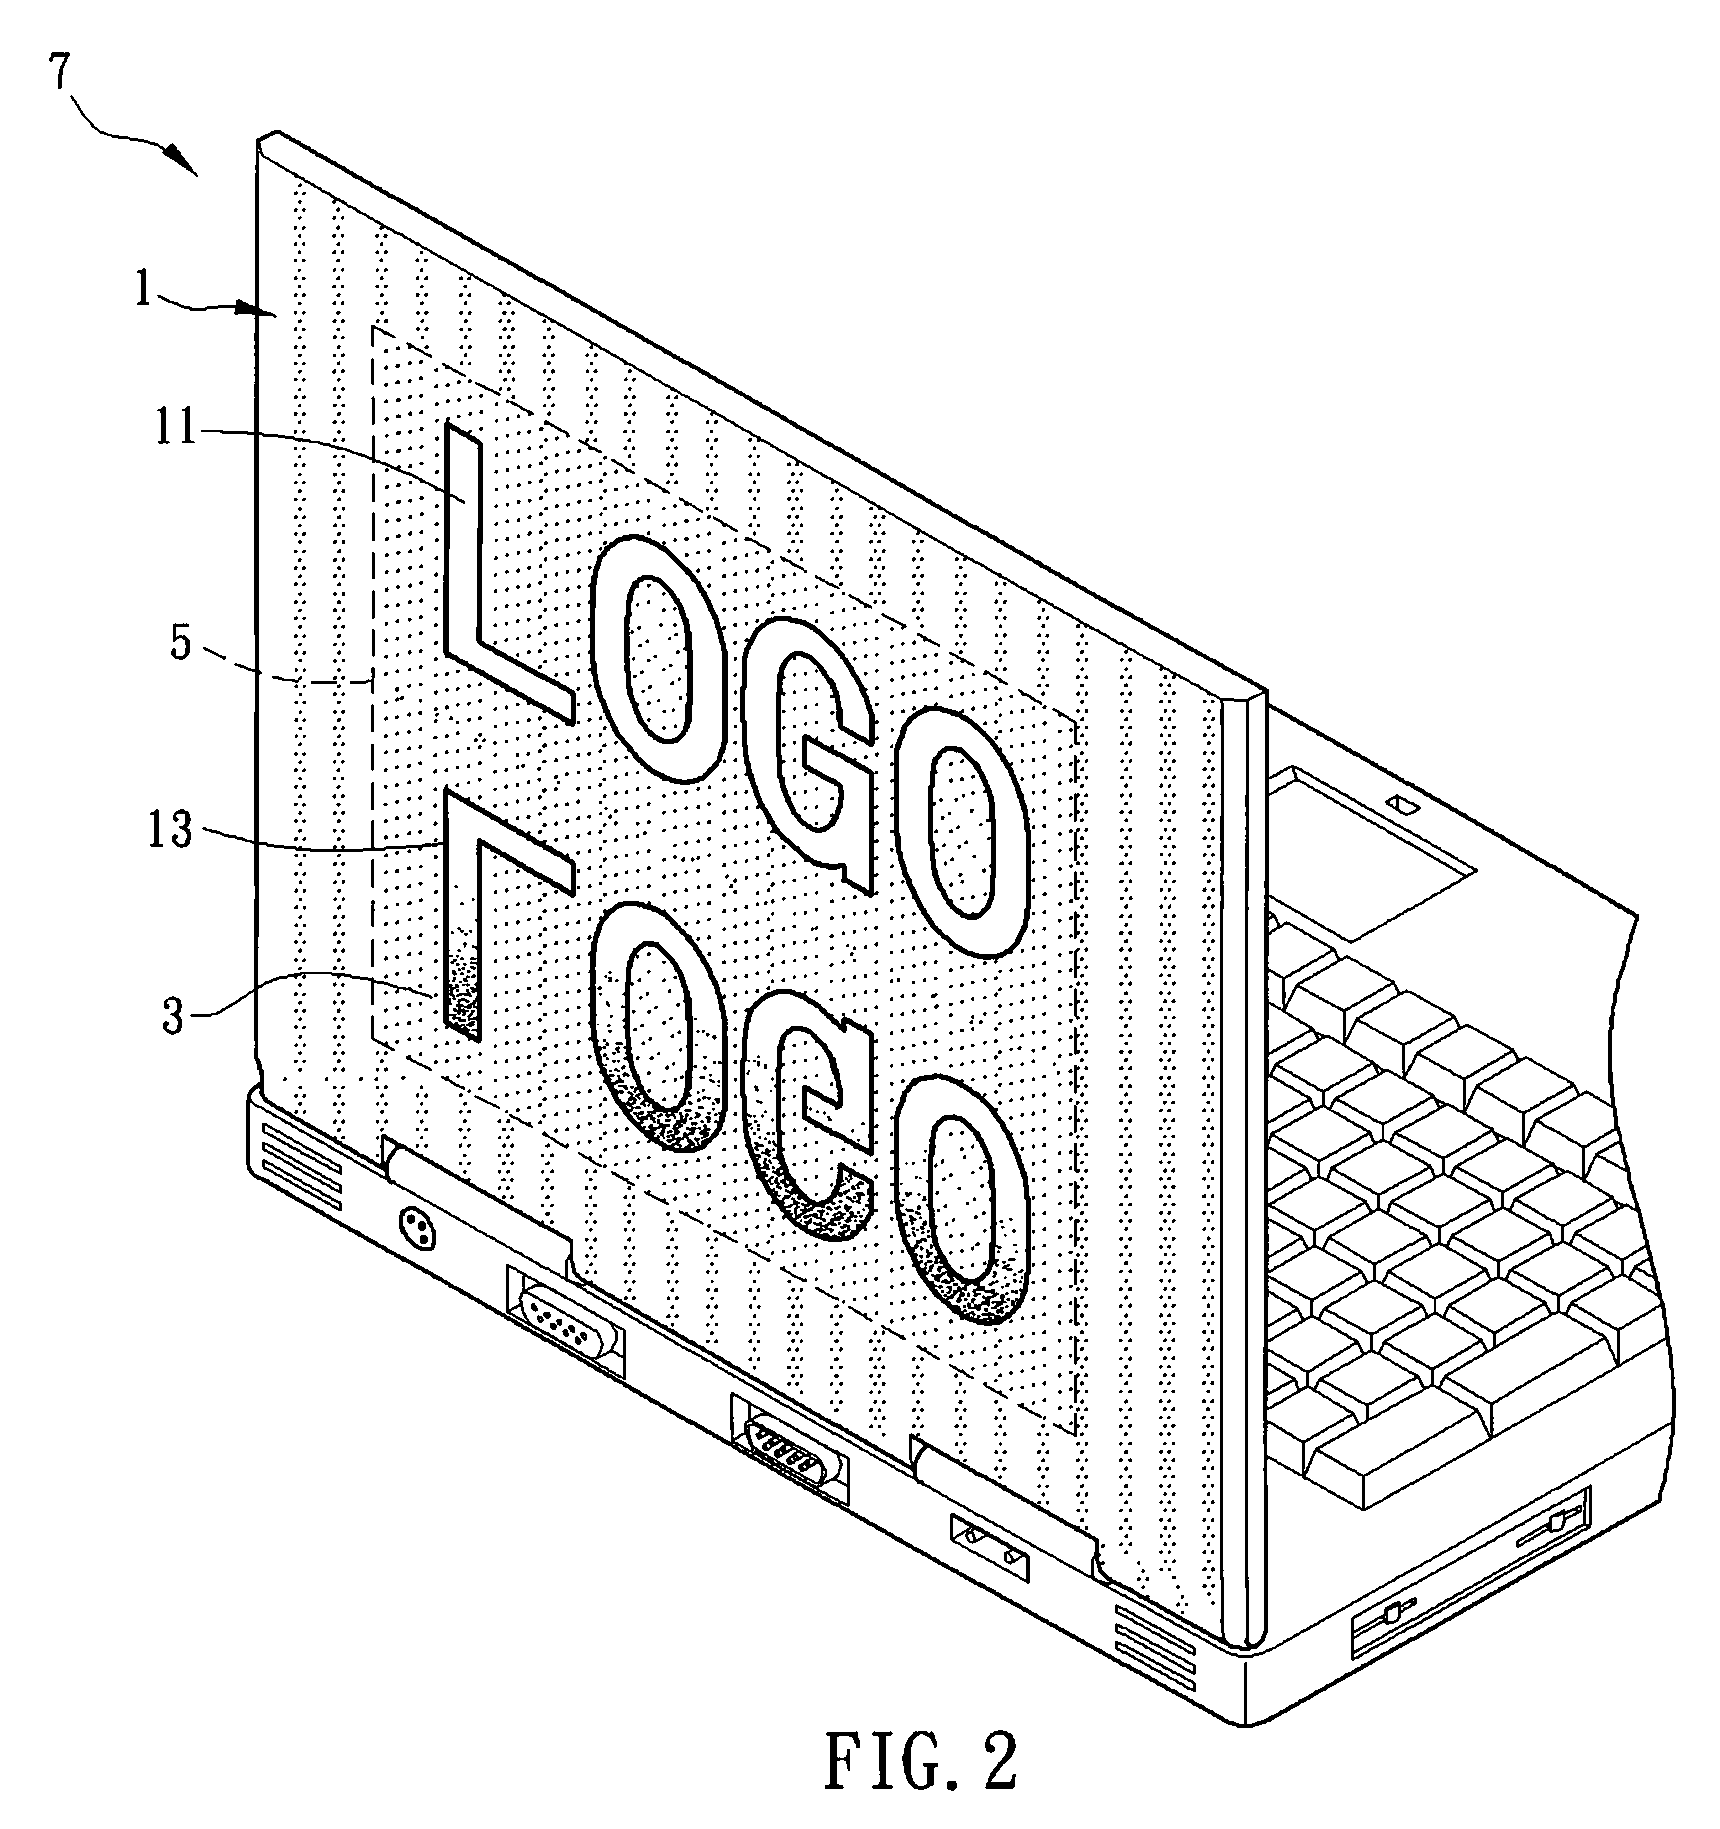 Casing, method for manufacturing the same, and electronic device having the same